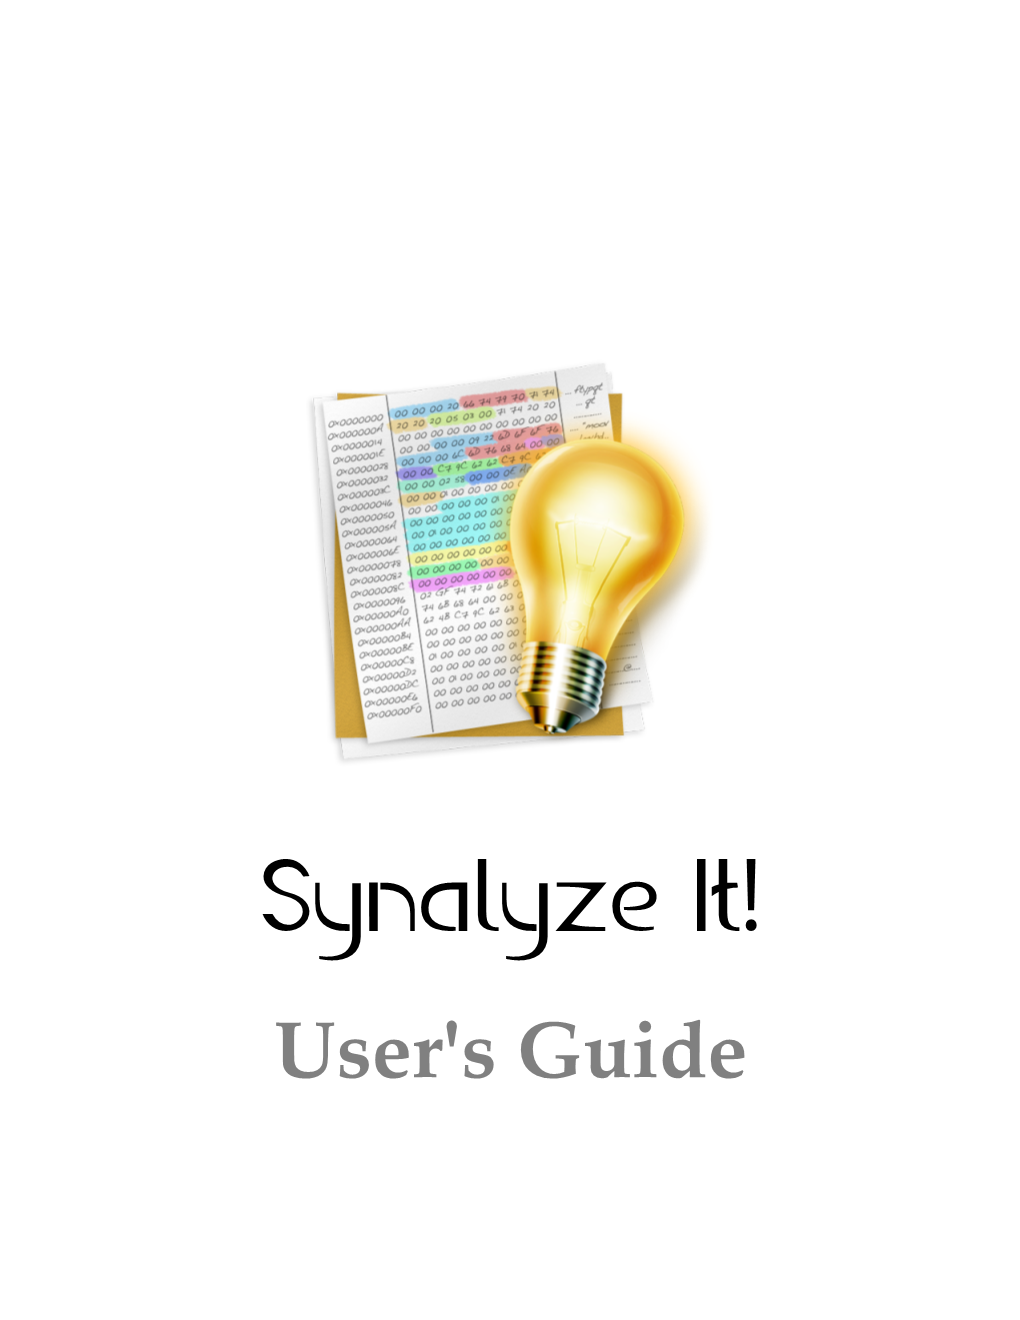 User's Guide Synalyze It!: User's Guide Andreas Pehnack Copyright © 2009, 2010, 2011, 2012, 2013, 2014, 2015, 2016 Andreas Pehnack